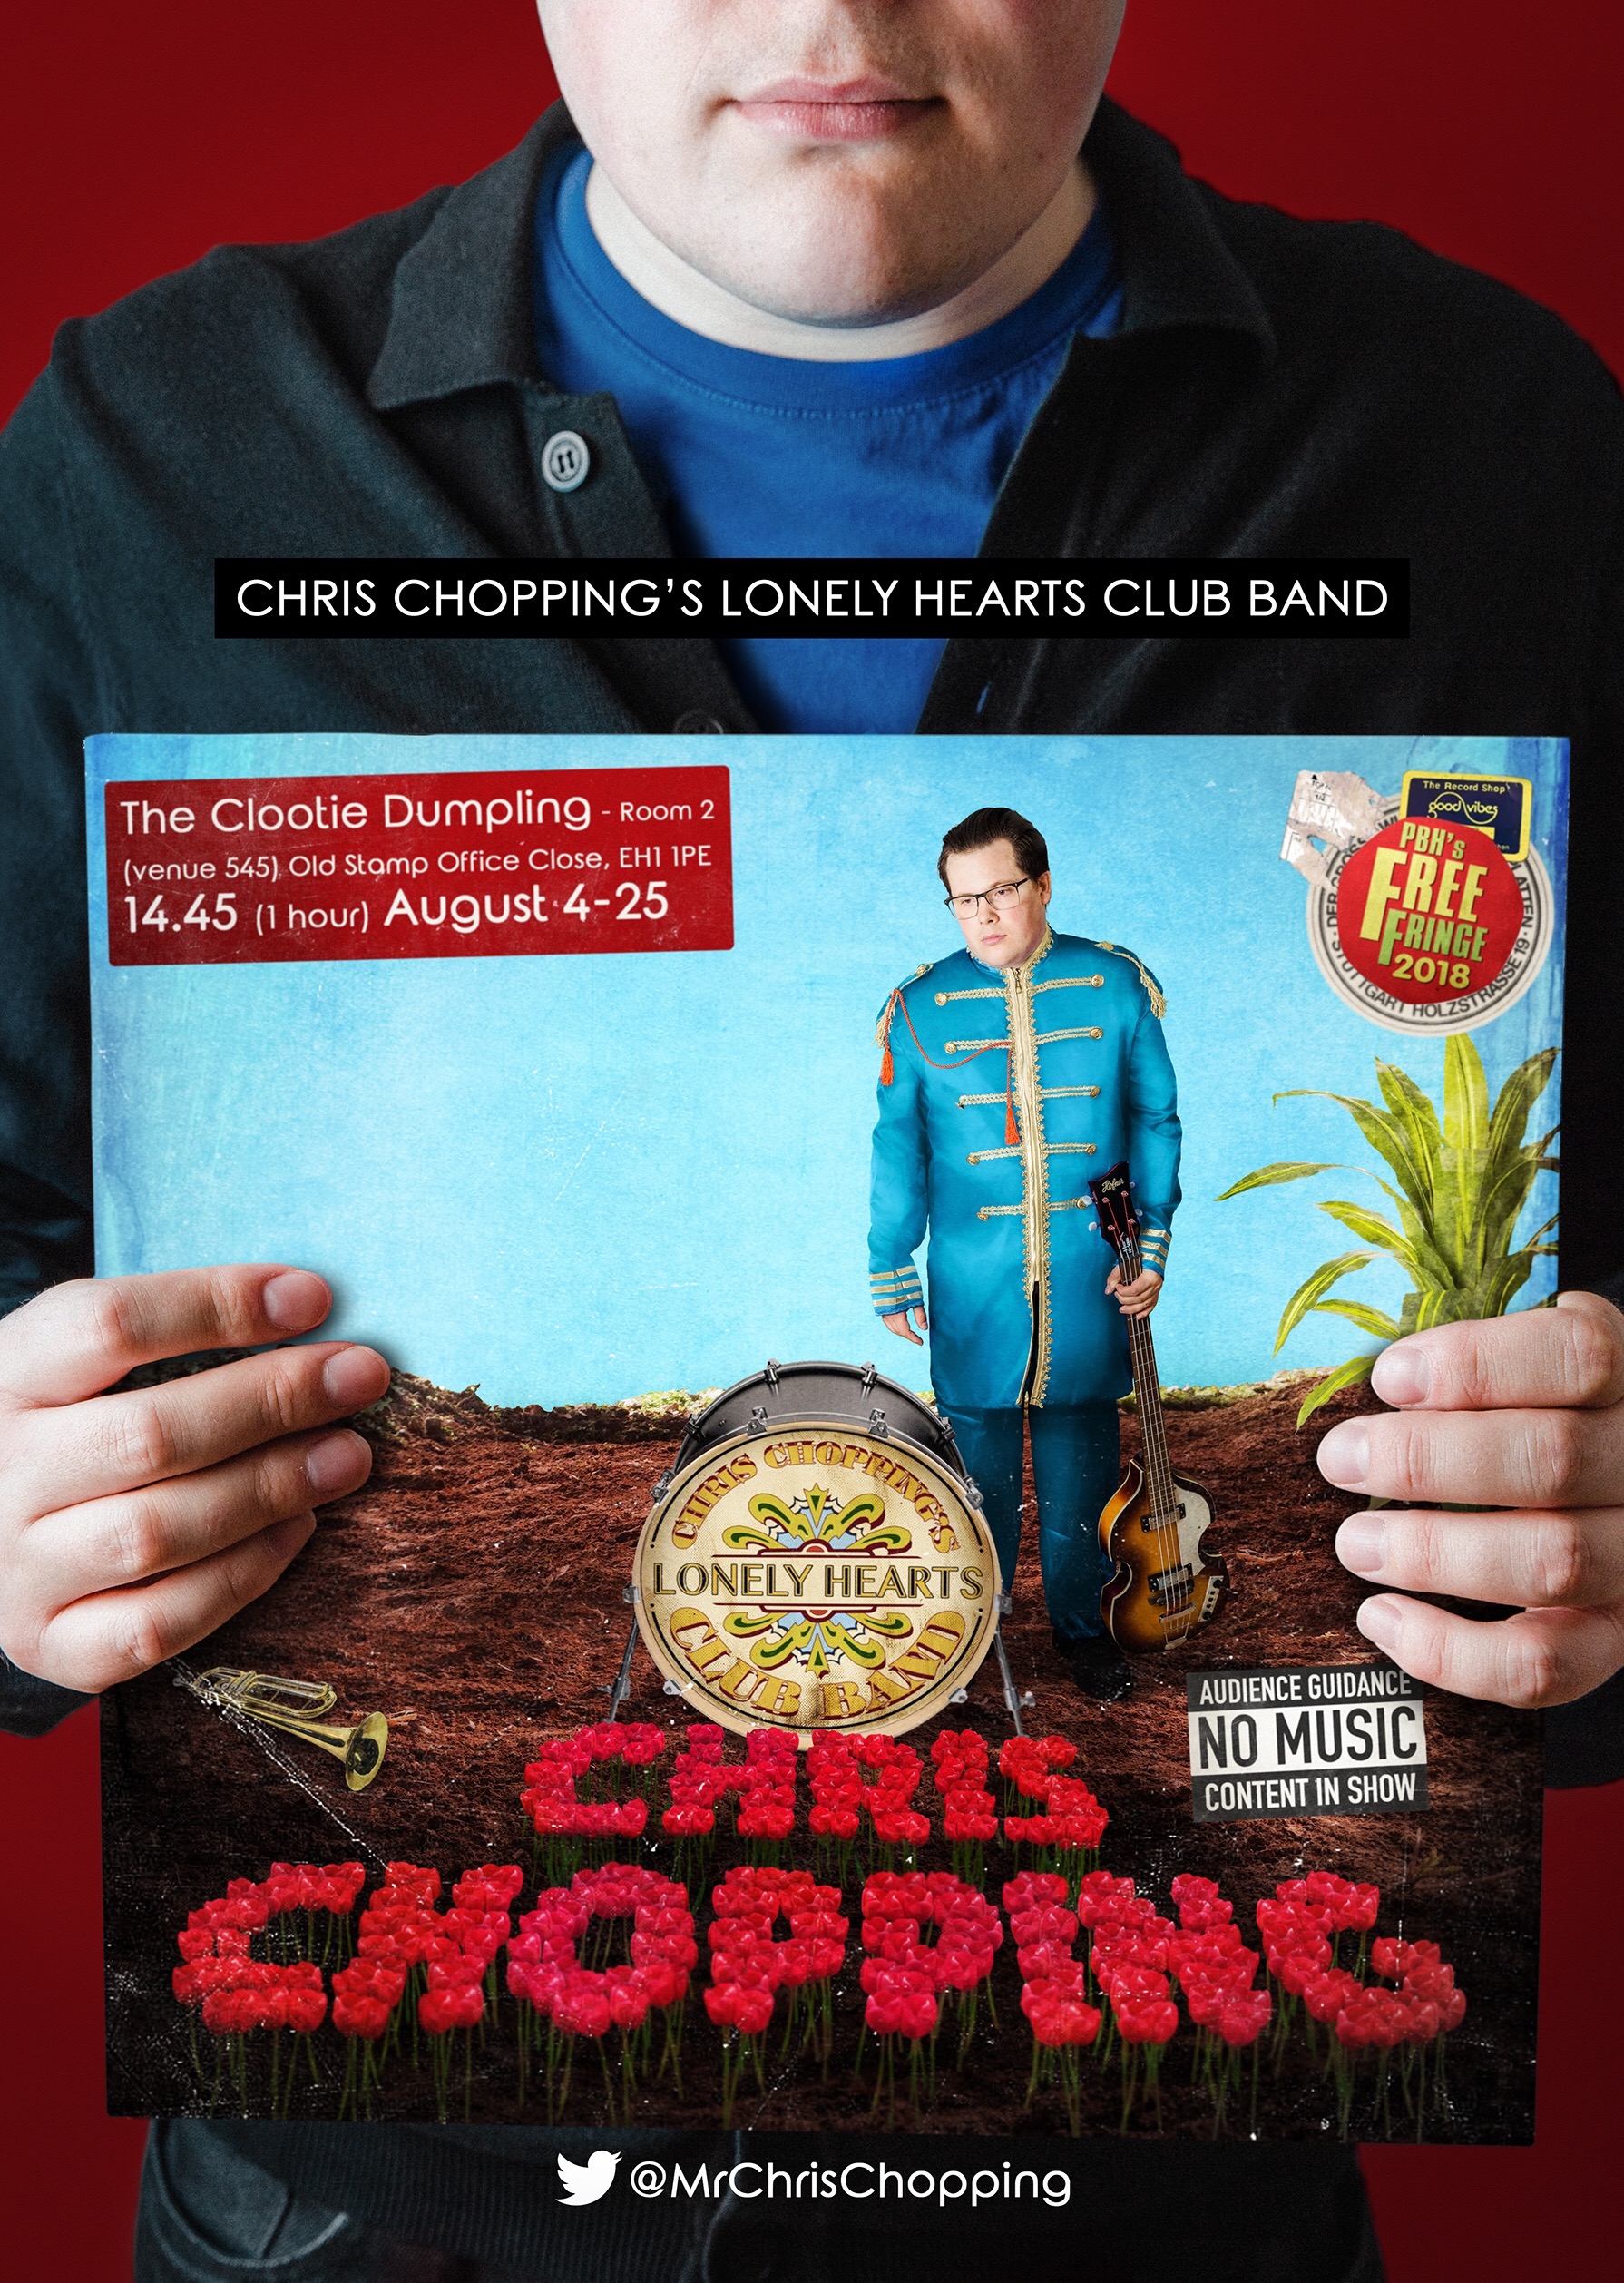 The poster for Chris Chopping's Lonely Hearts Club Band